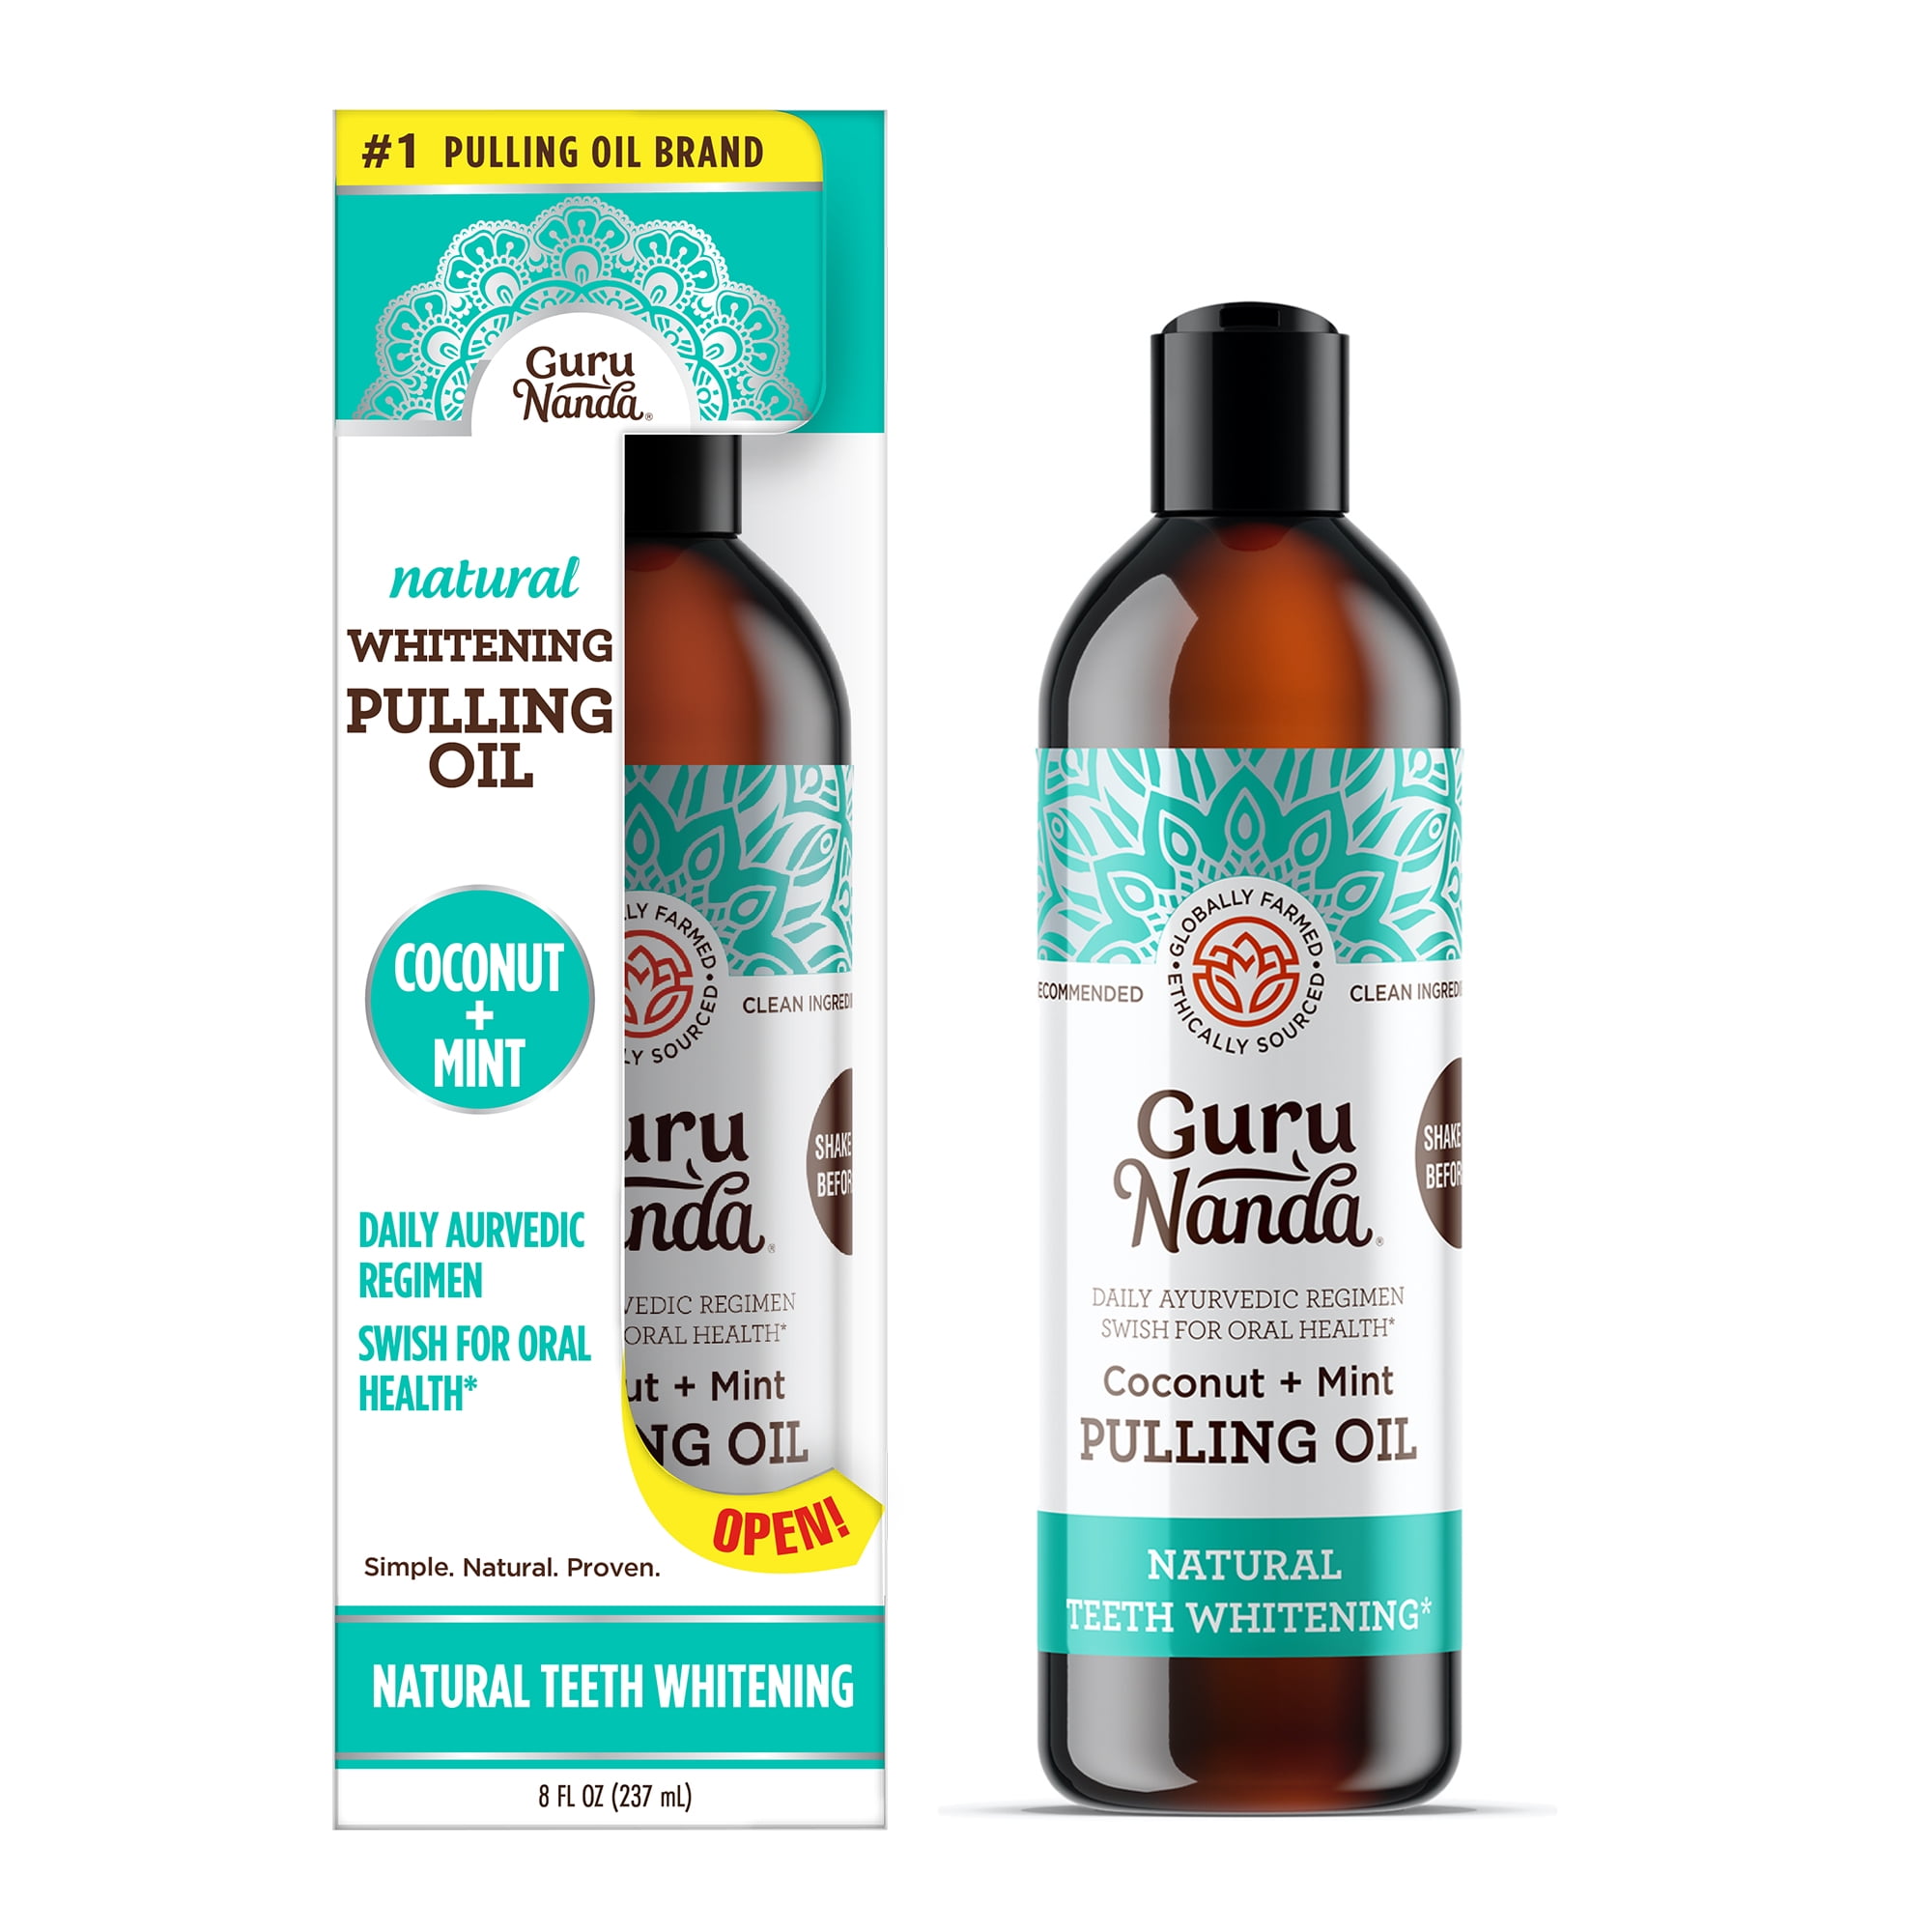 GuruNanda Whitening Pulling Oil, Coconut Oil & Pure Peppermint Essential Oil - Natural Teeth Whitening Oral Rinse - 8 oz